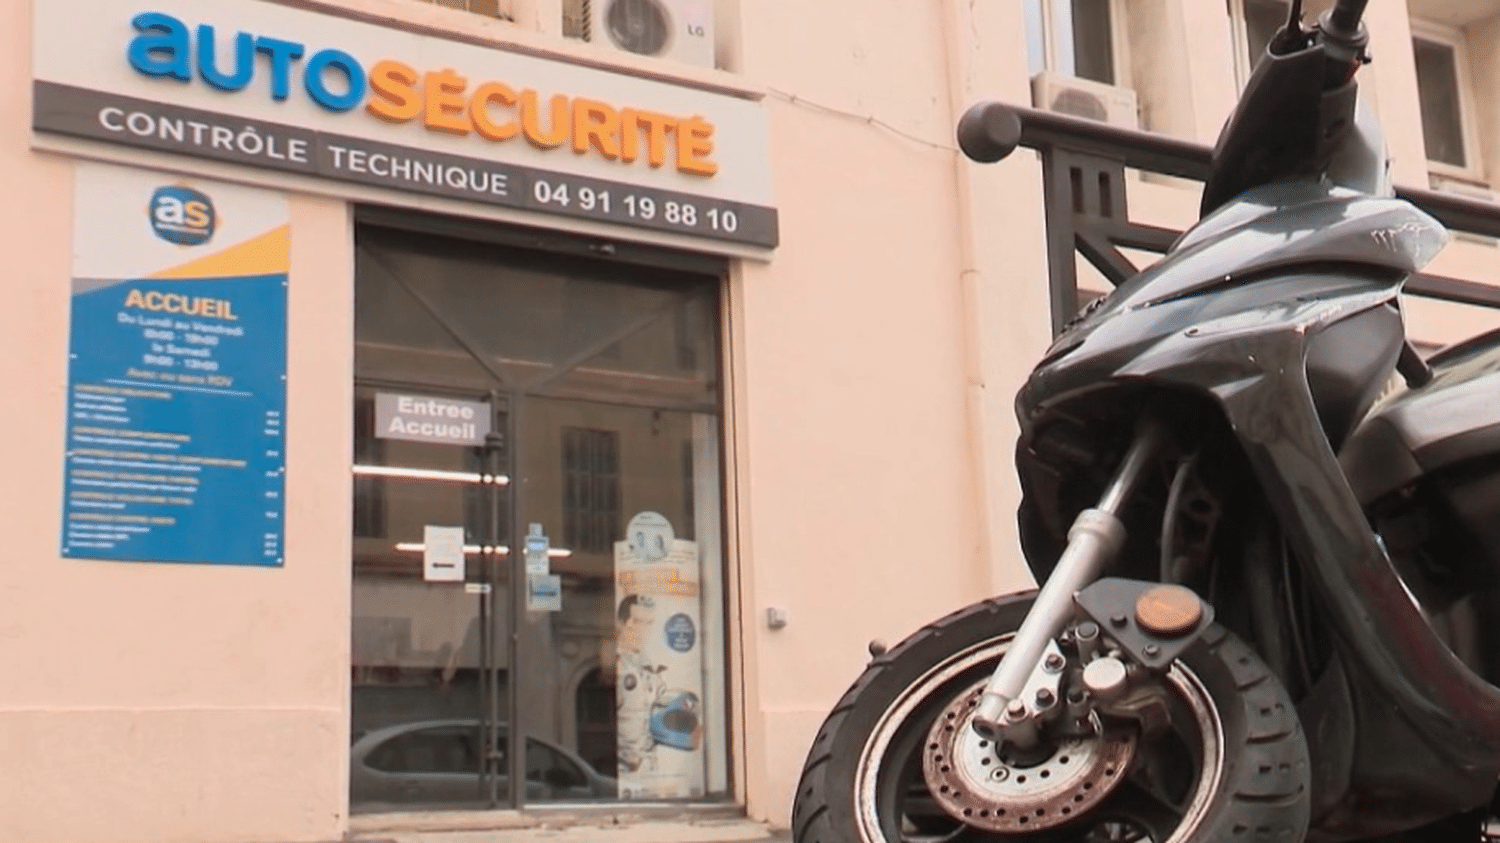 Technical inspection of two-wheelers: launch of a controversial measure